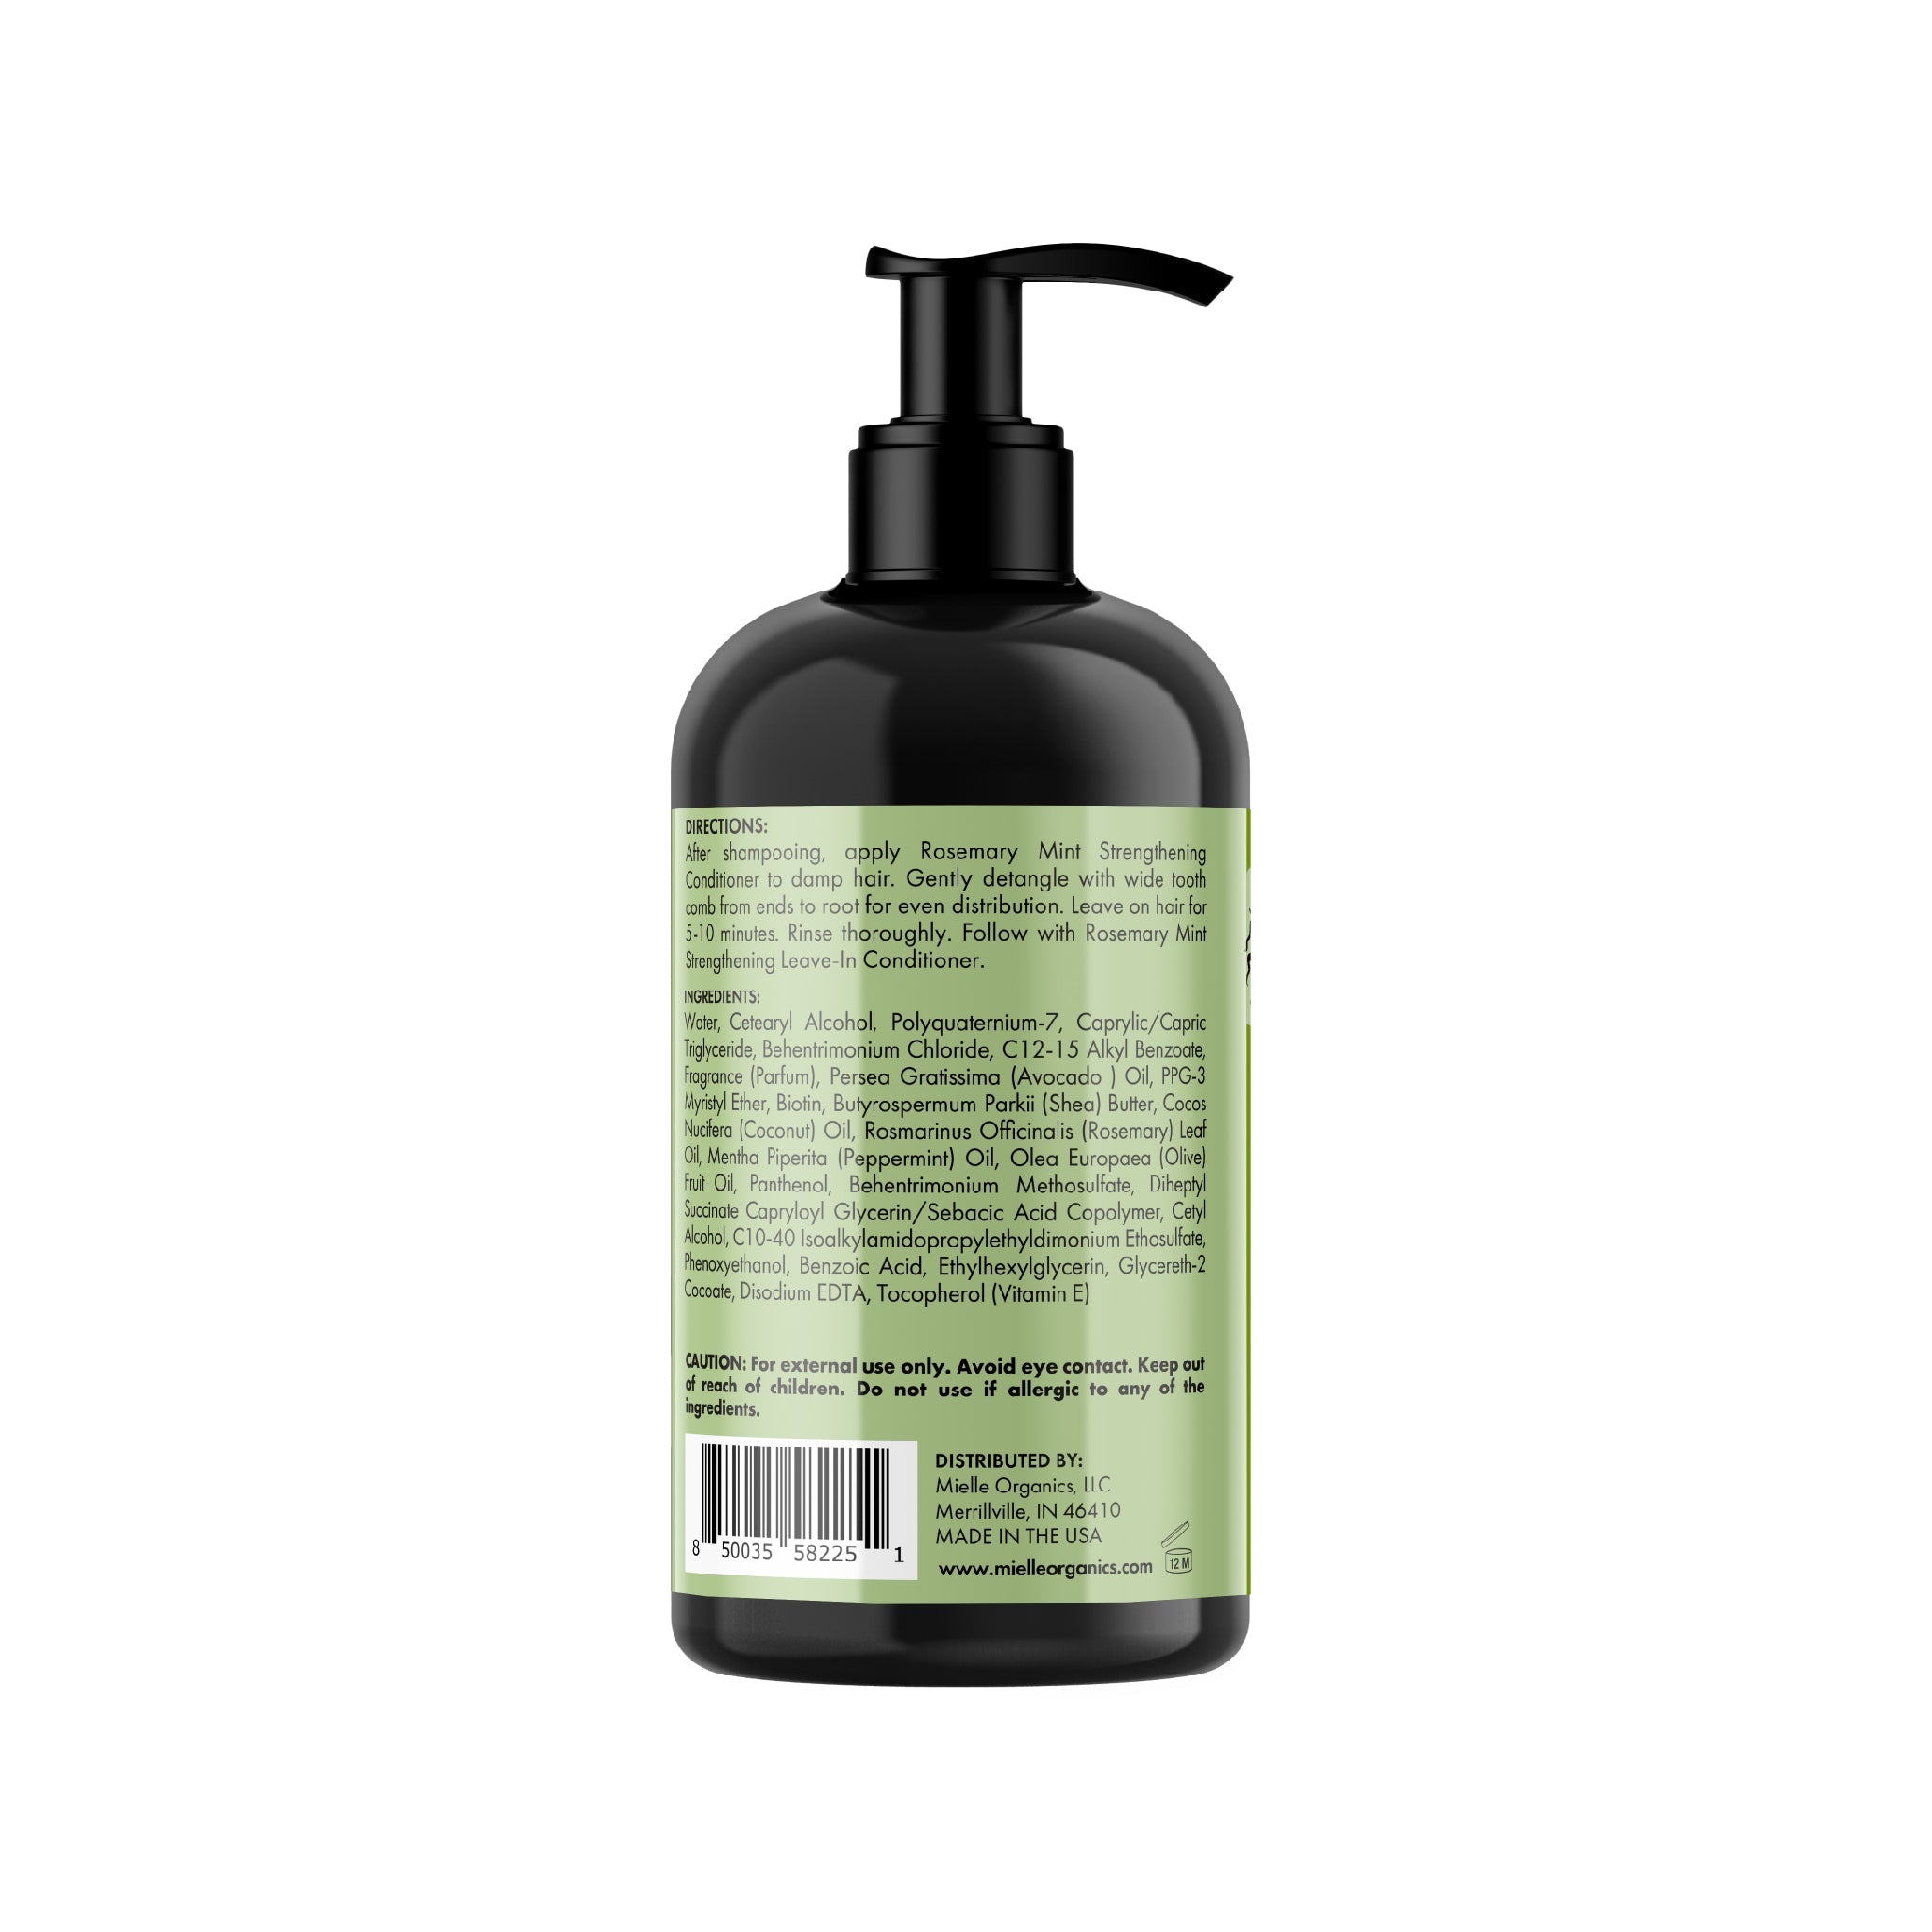 MIELLE - Rosemary Mint Strengthening Conditioner